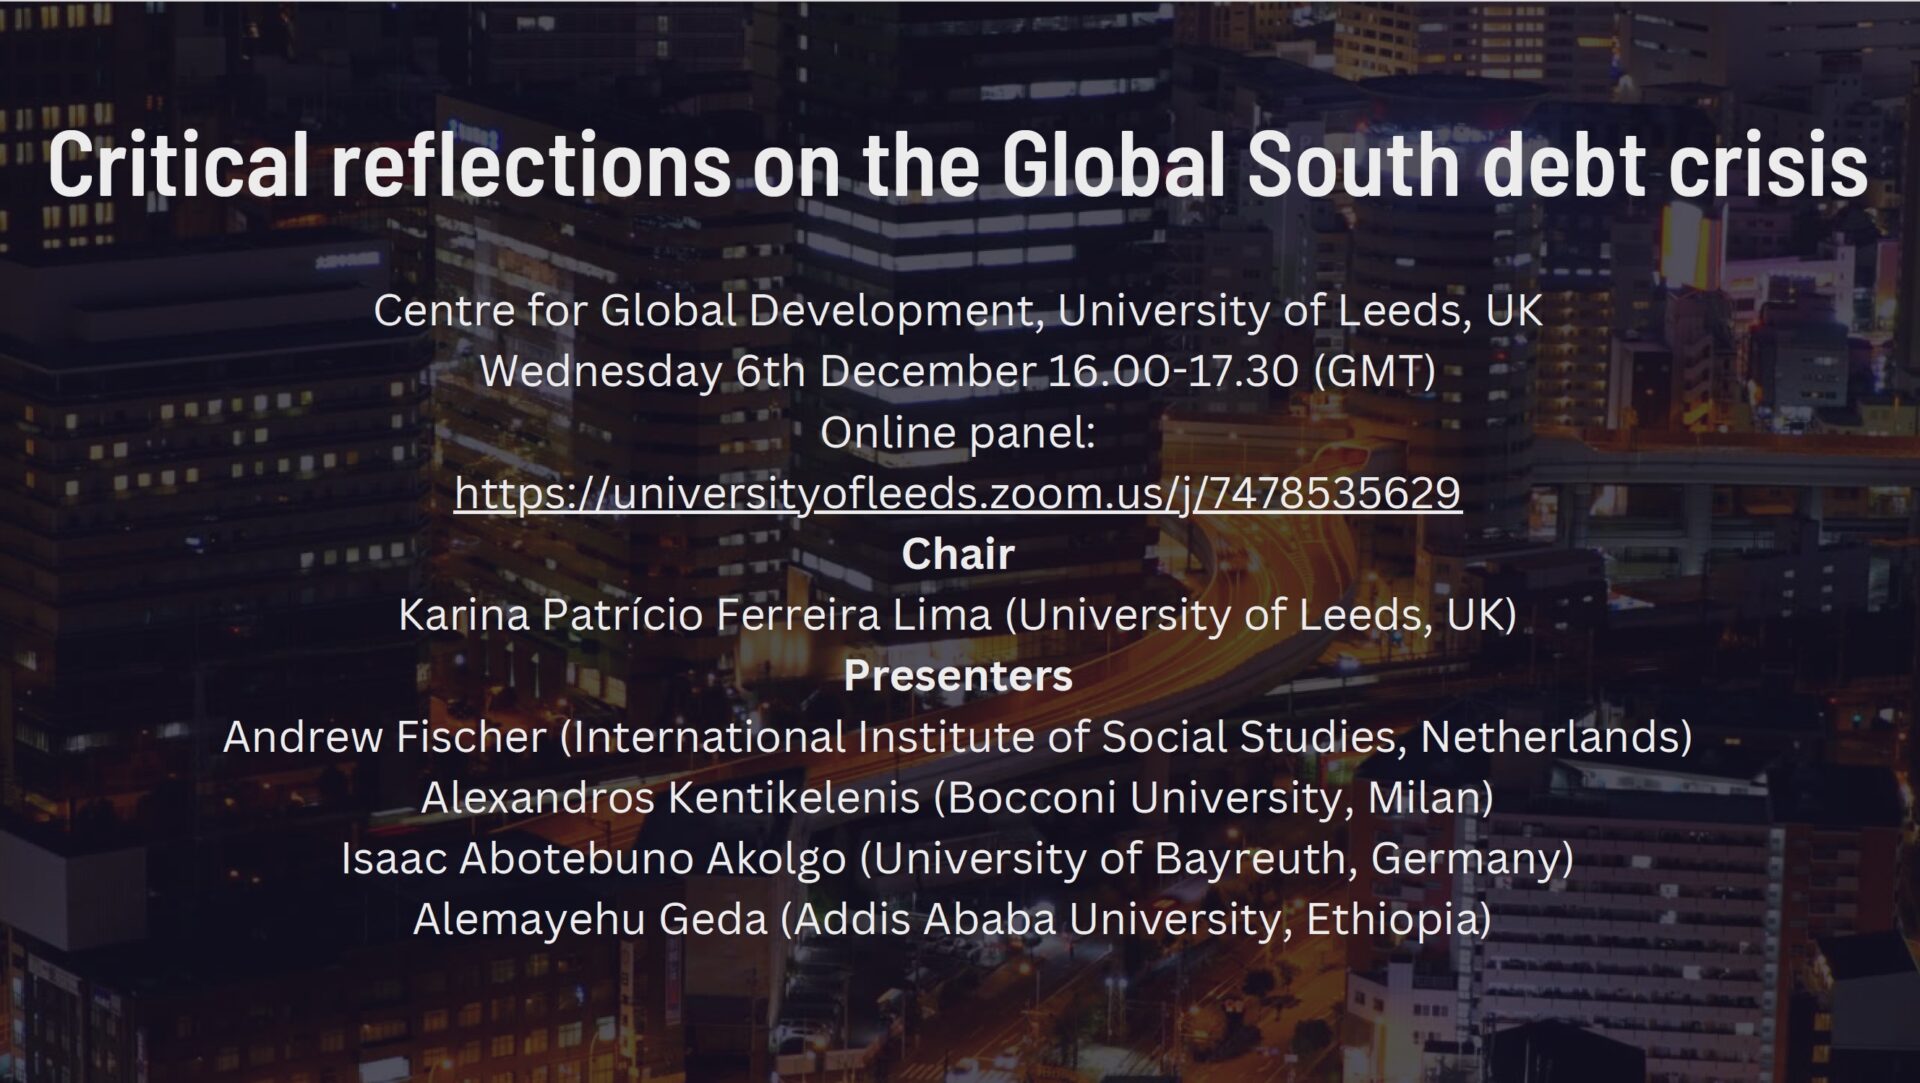 CGD Event: Critical Reflections on the Global South Debt Crisis